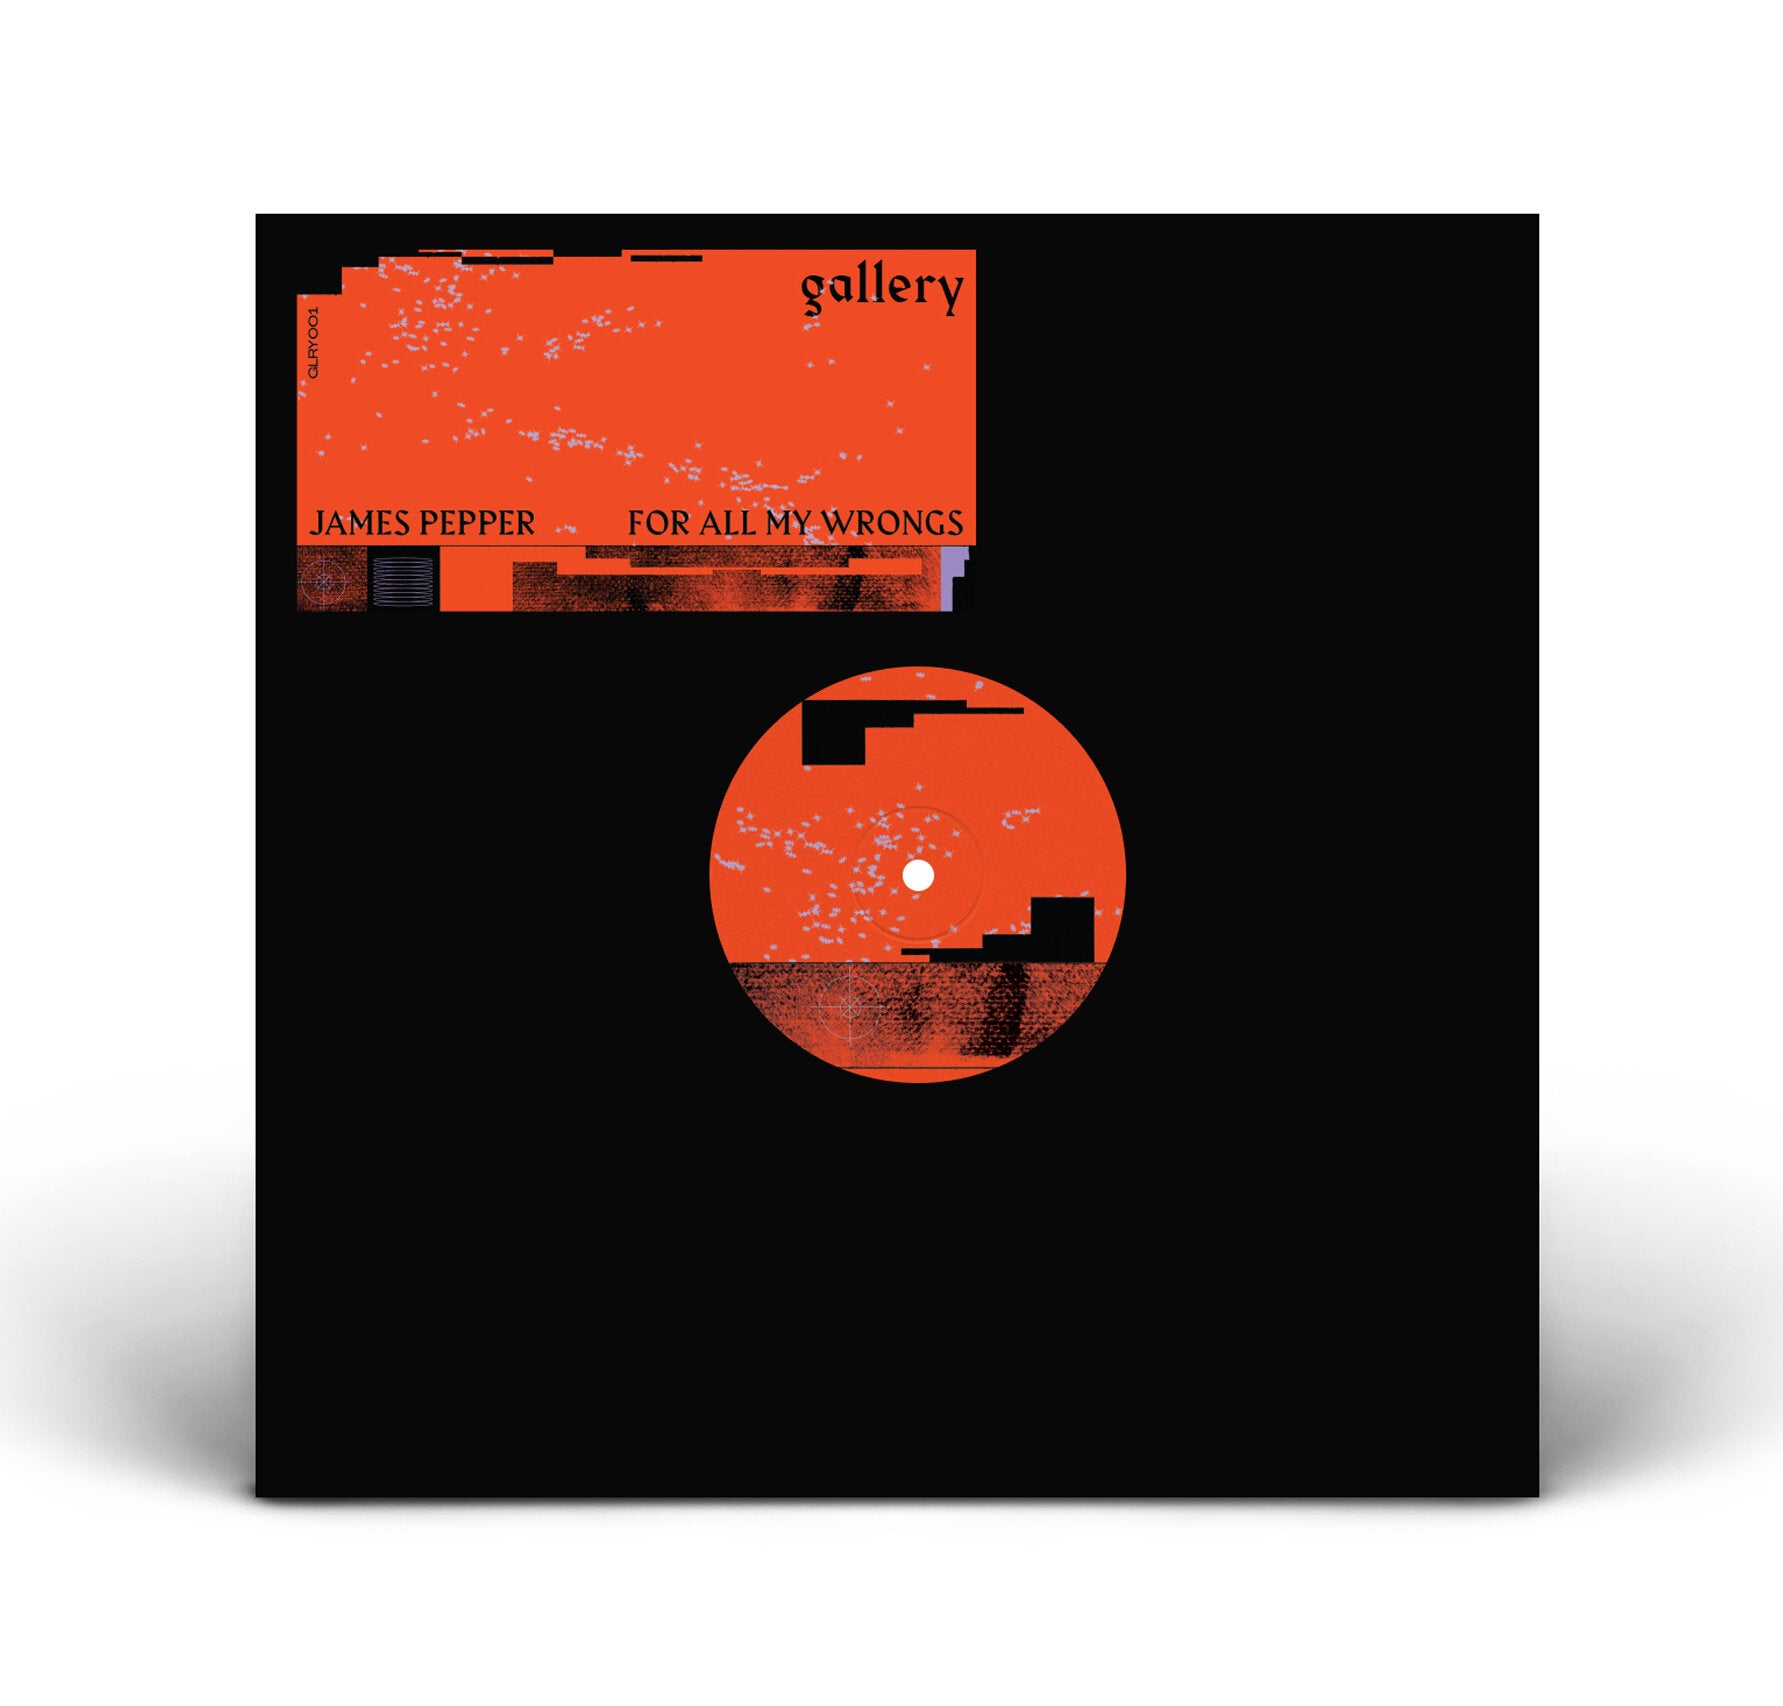 GLRY001 James Pepper 'For All My Wrongs' EP